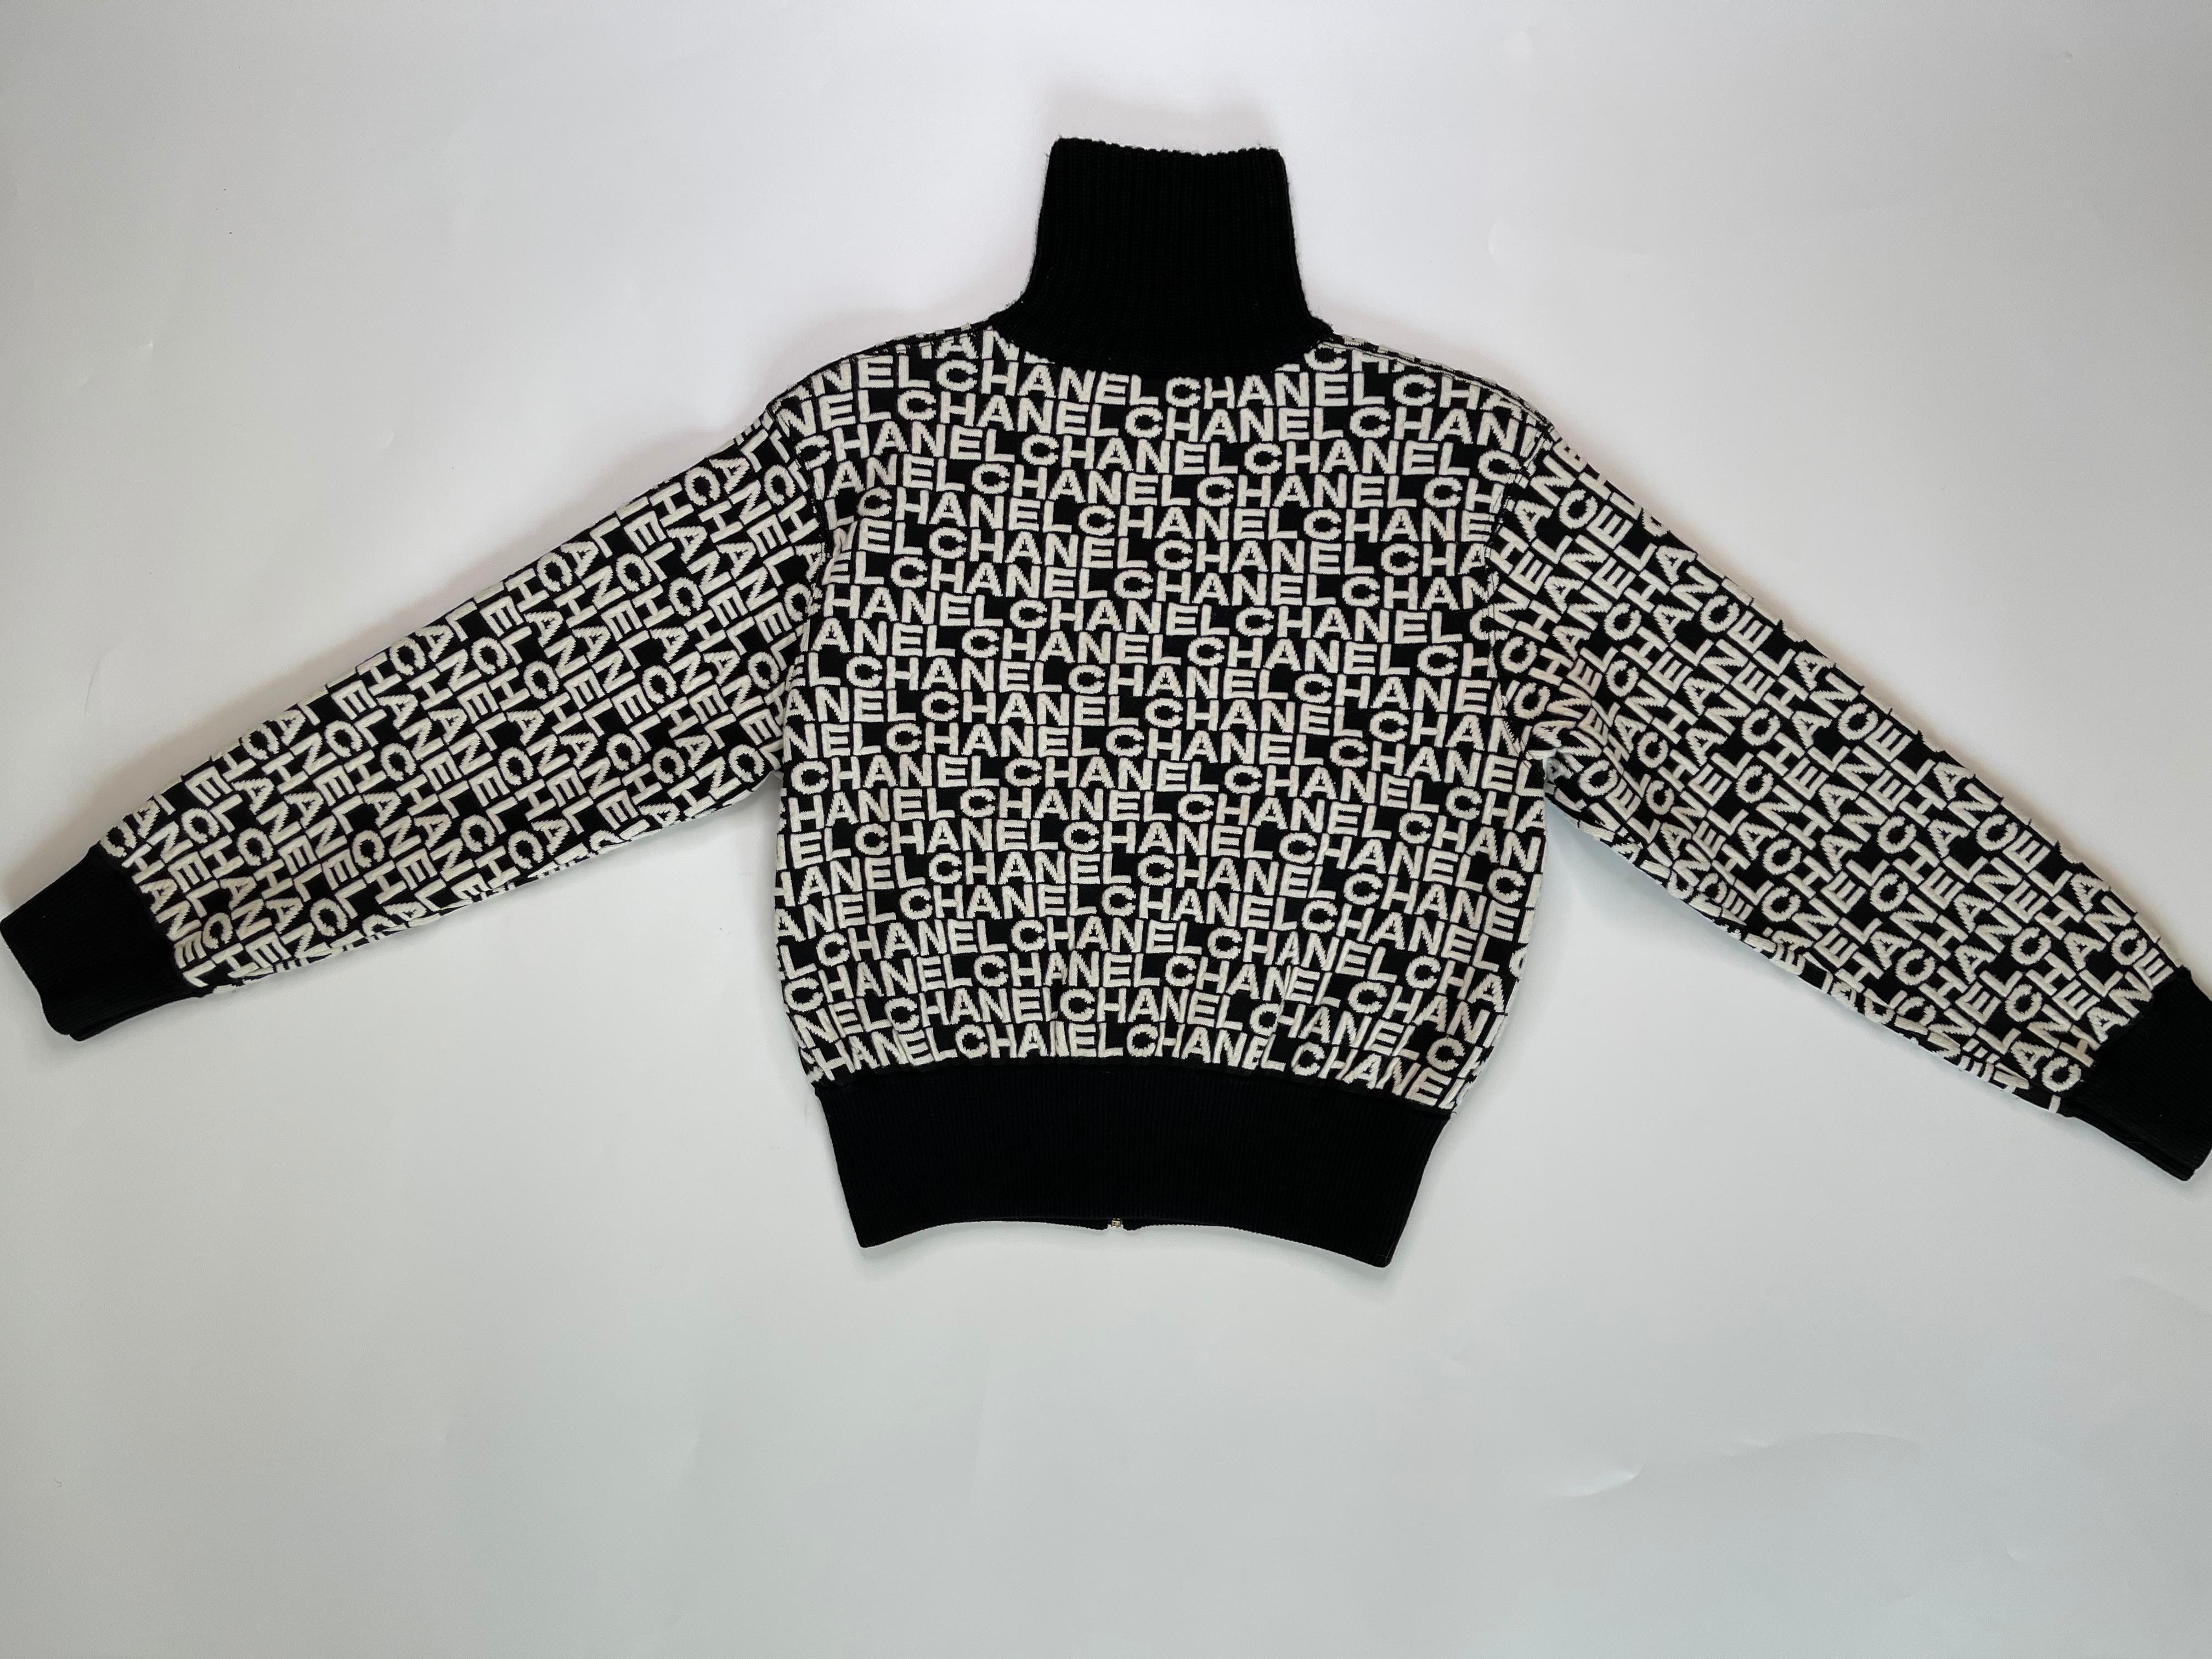 White and Black Chanel turtleneck with logo throughout. Zipper on the front, and two external zipped pockets. 

COLOR: White and black
MATERIAL: 59% wool, 40% polyamide, 1% elasthanne
ITEM CODE: P61955K47642
SIZE: 40 (IT)
CONDITION: Very good